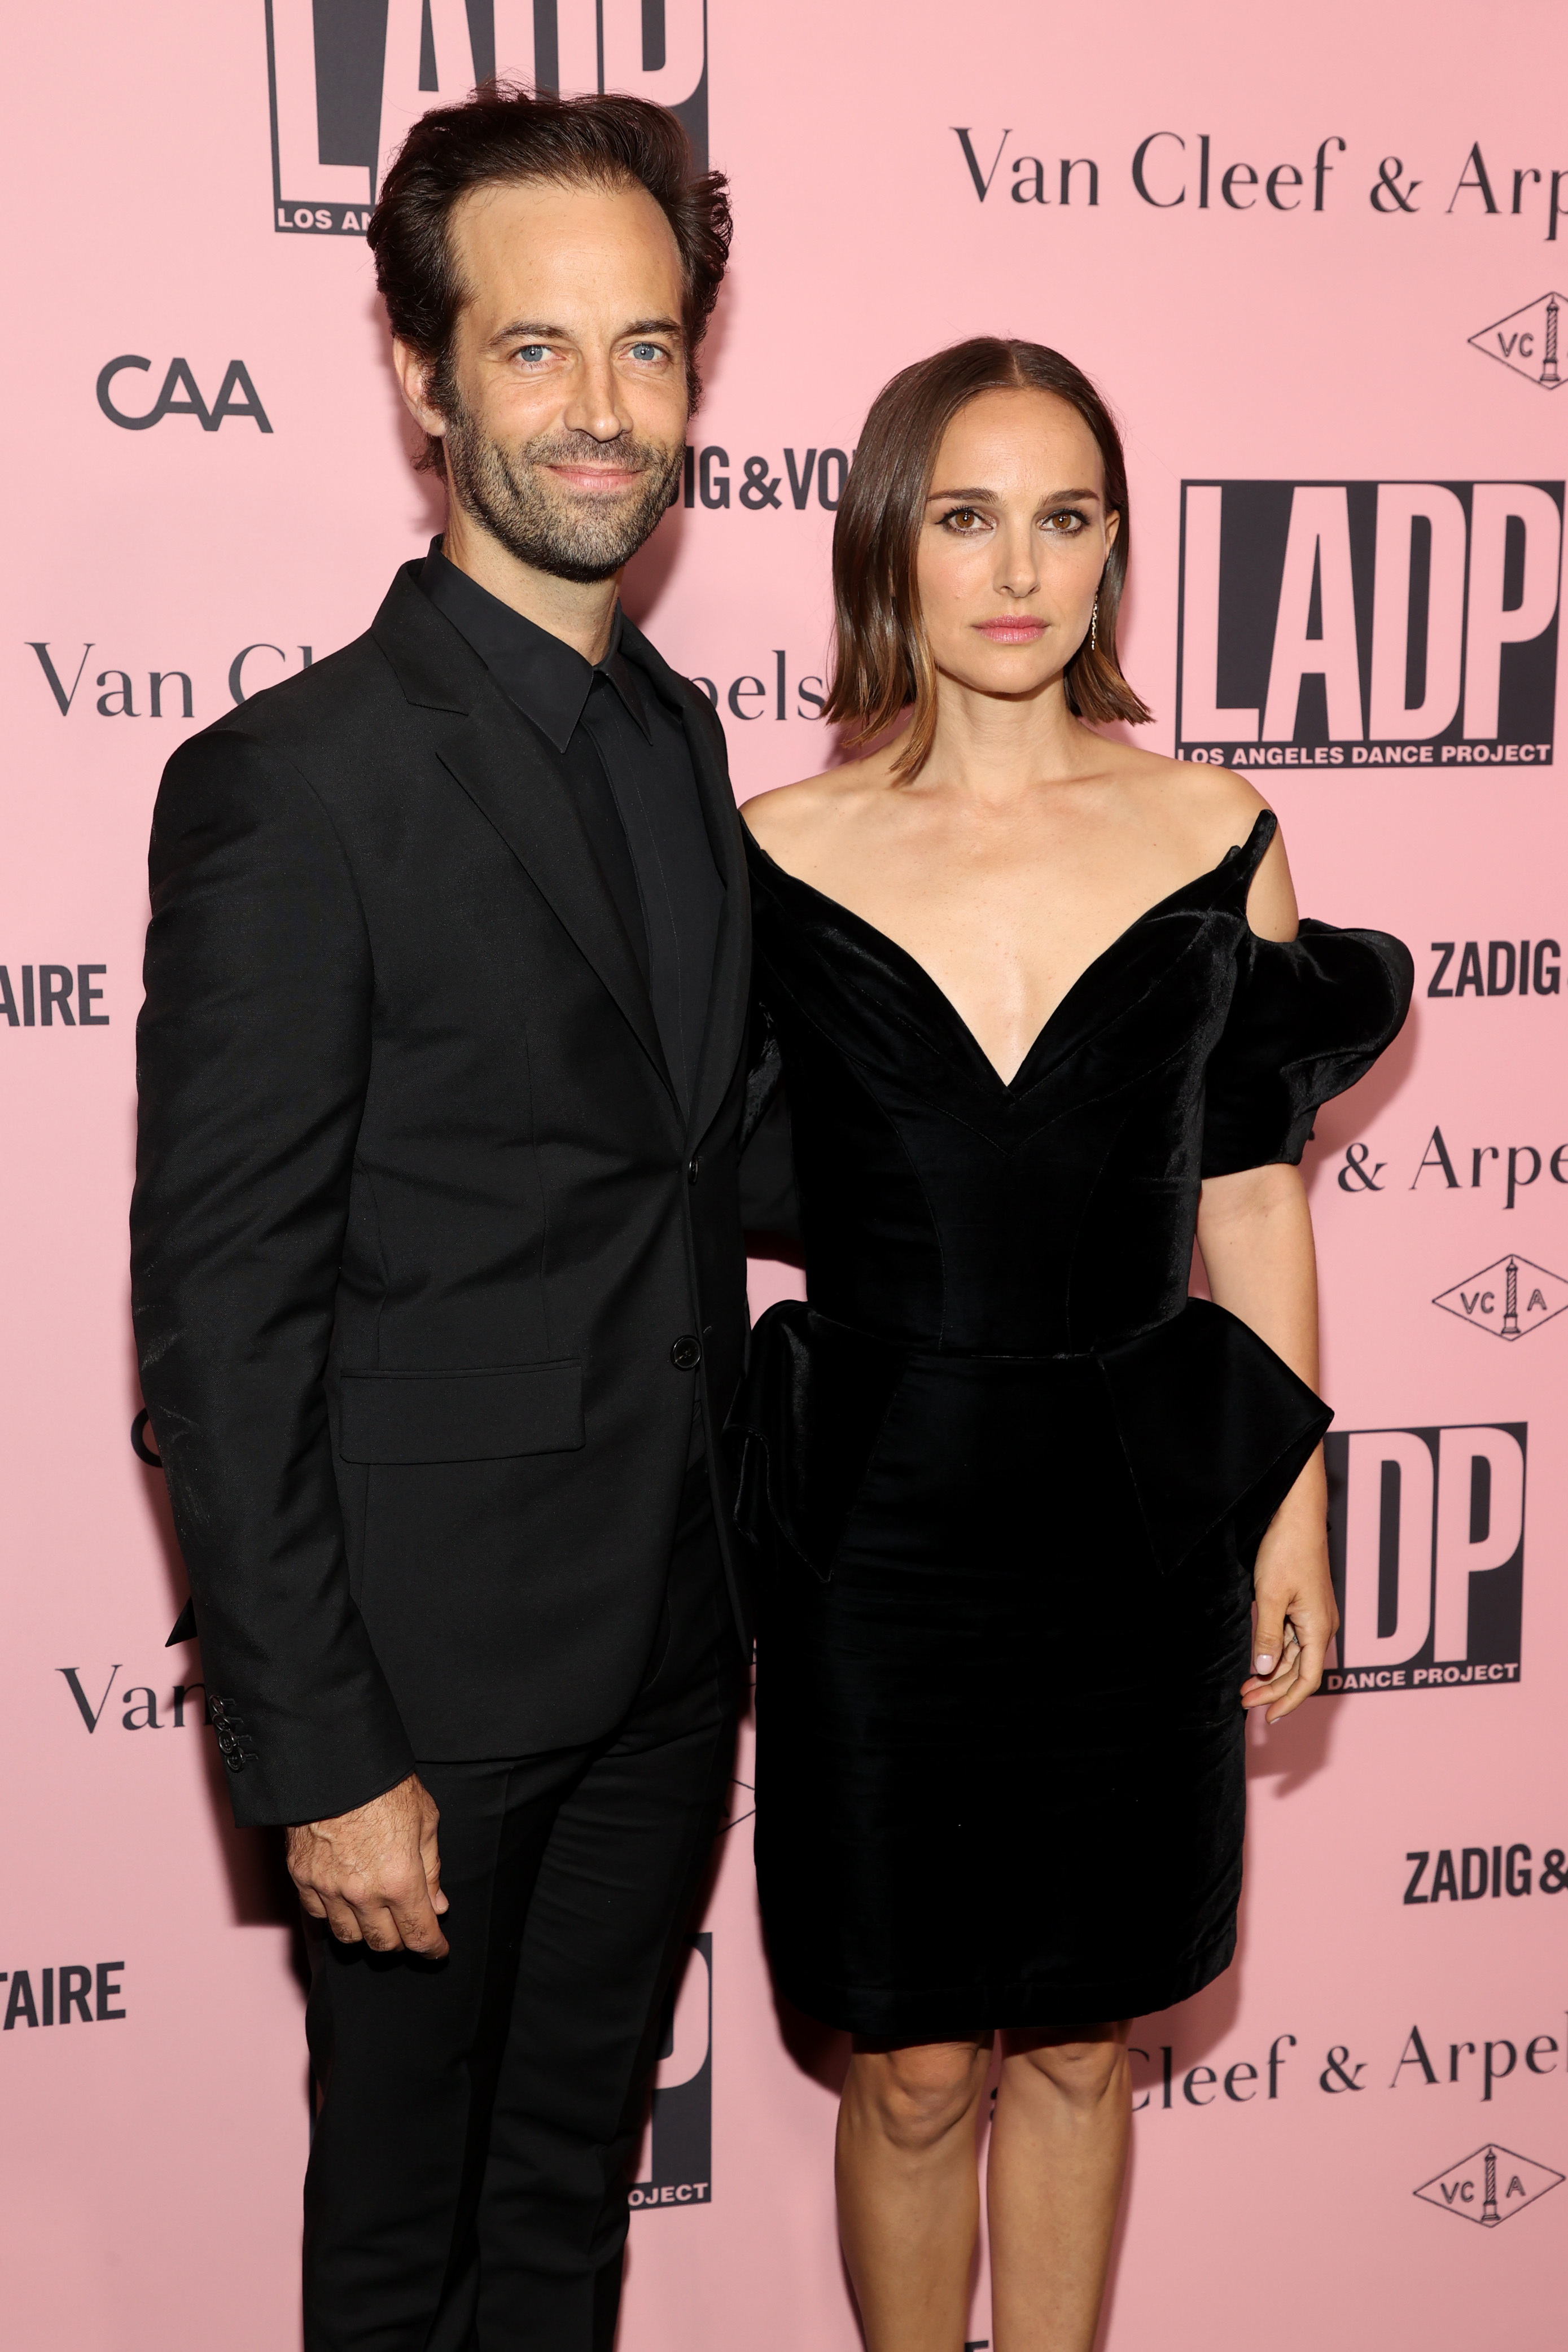 The couple at a media event together, he in a black suit and she in a black off-the-shoulder velvet dress